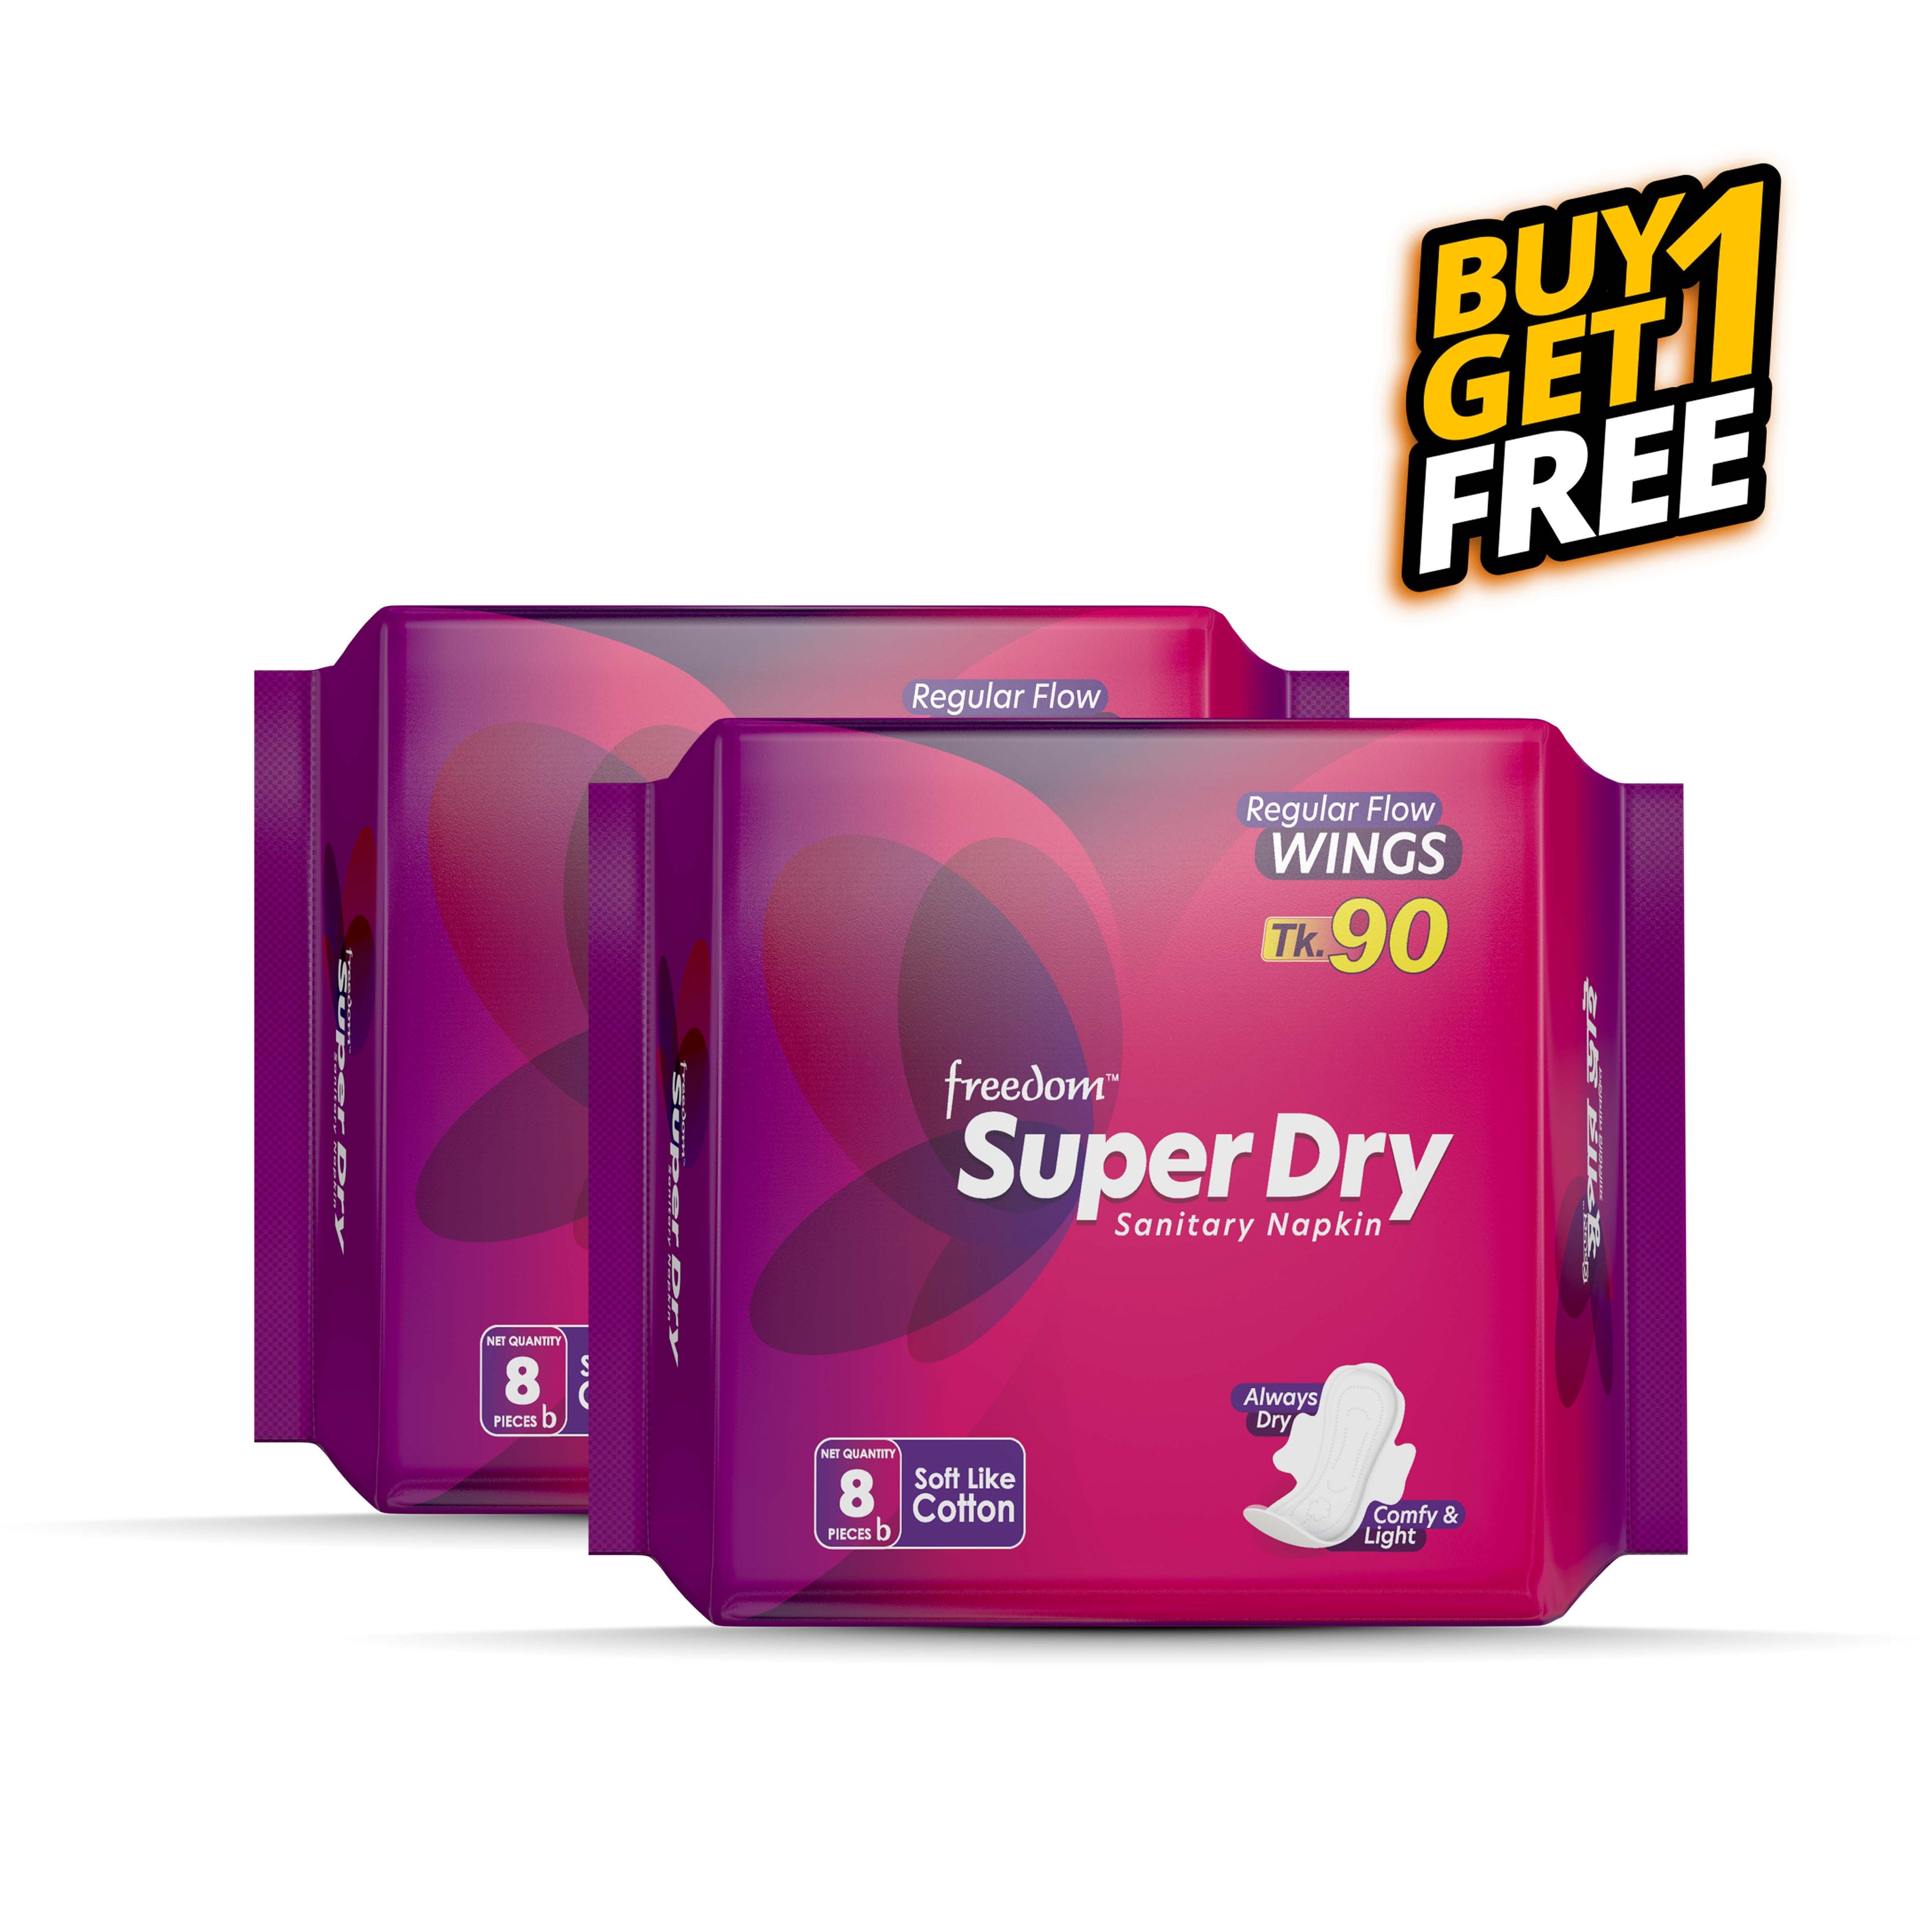 Freedom Super Dry 8 Pads (Buy 1 Get 1 Free)